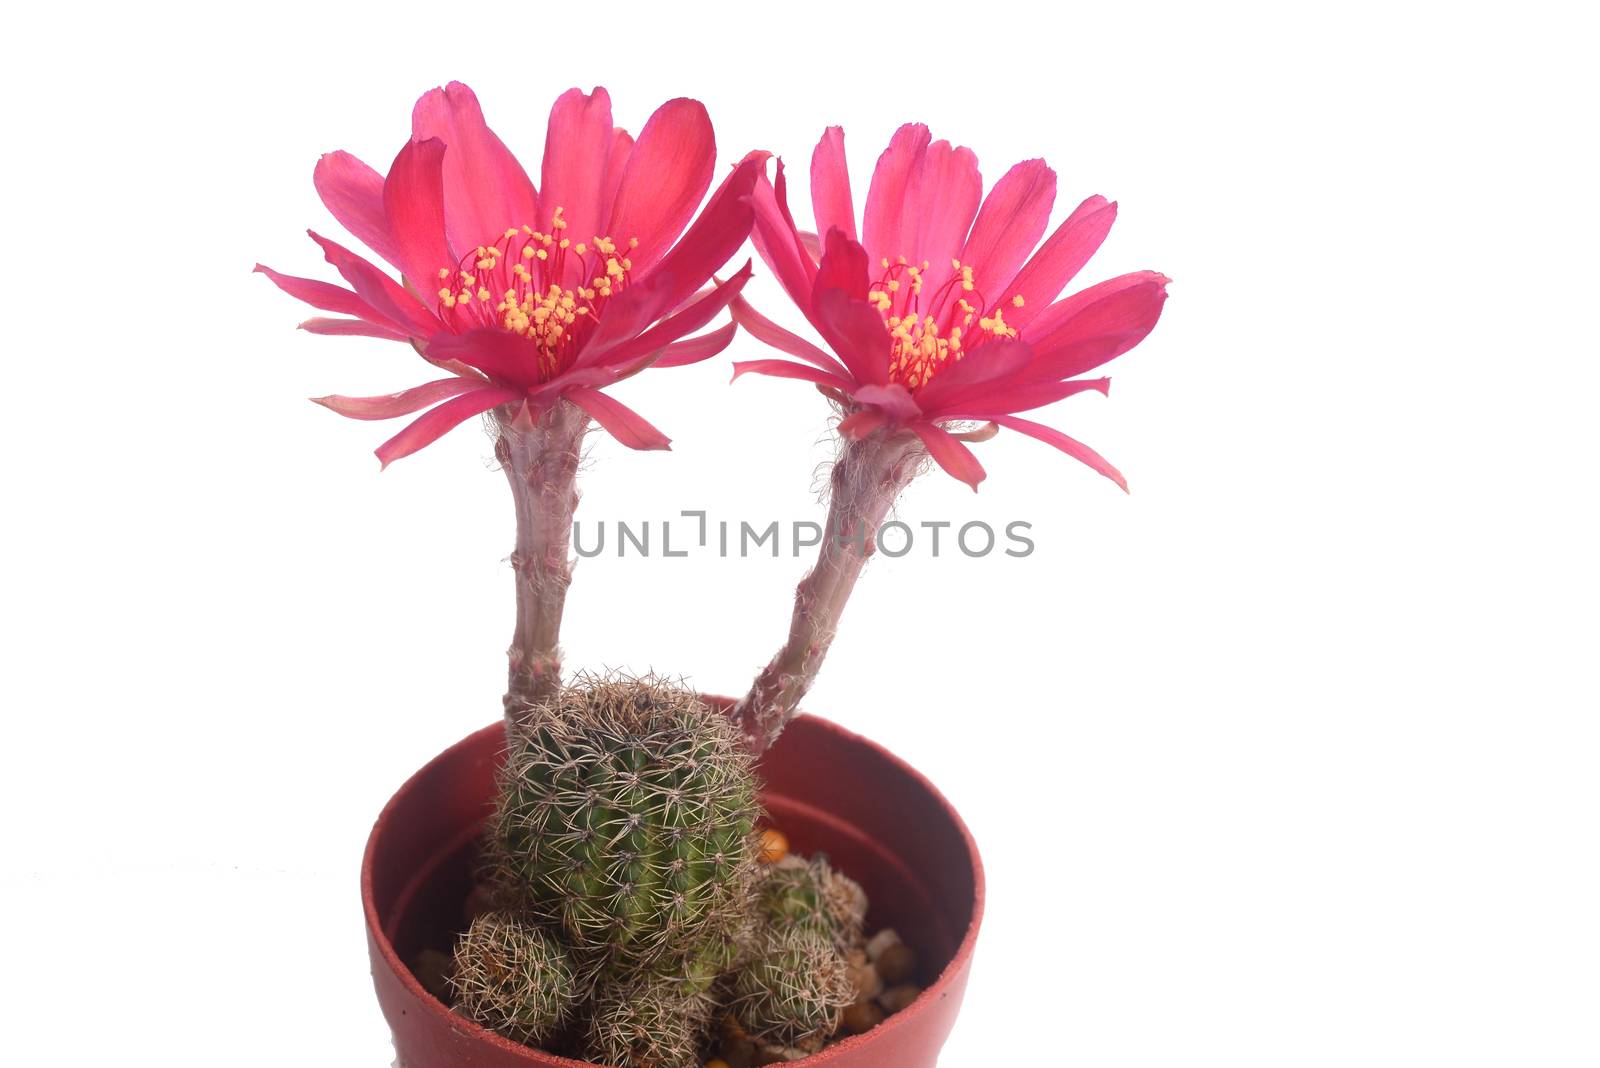 Blooming red flower of Lobivia cactus on  white background by ideation90